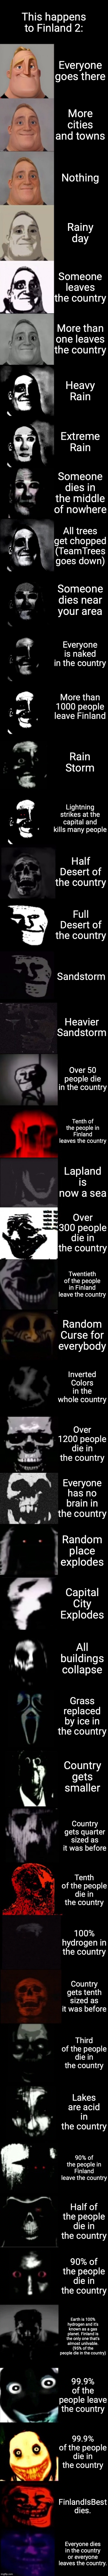 This happens to Finland (I'm not giving u mod, this stream has already 3 mods) | This happens to Finland 2:; Everyone goes there; More cities and towns; Nothing; Rainy day; Someone leaves the country; More than one leaves the country; Heavy Rain; Extreme Rain; Someone dies in the middle of nowhere; All trees get chopped (TeamTrees goes down); Someone dies near your area; Everyone is naked in the country; More than 1000 people leave Finland; Rain Storm; Lightning strikes at the capital and kills many people; Half Desert of the country; Full Desert of the country; Sandstorm; Heavier Sandstorm; Over 50 people die in the country; Tenth of the people in Finland leaves the country; Lapland is now a sea; Over 300 people die in the country; Twentieth of the people in Finland leave the country; Random Curse for everybody; Inverted Colors in the whole country; Over 1200 people die in the country; Everyone has no brain in the country; Random place explodes; Capital City Explodes; All buildings collapse; Grass replaced by ice in the country; Country gets smaller; Country gets quarter sized as it was before; Tenth of the people die in the country; 100% hydrogen in the country; Country gets tenth sized as it was before; Third of the people die in the country; Lakes are acid in the country; 90% of the people in Finland leave the country; Half of the people die in the country; 90% of the people die in the country; Earth is 100% hydrogen and it's known as a gas planet. Finland is the only one that's almost unlivable. (95% of the people die in the country); 99.9% of the people leave the country; 99.9% of the people die in the country; FinlandIsBest dies. Everyone dies in the country or everyone leaves the country. | image tagged in mr incredible becoming uncanny full version | made w/ Imgflip meme maker